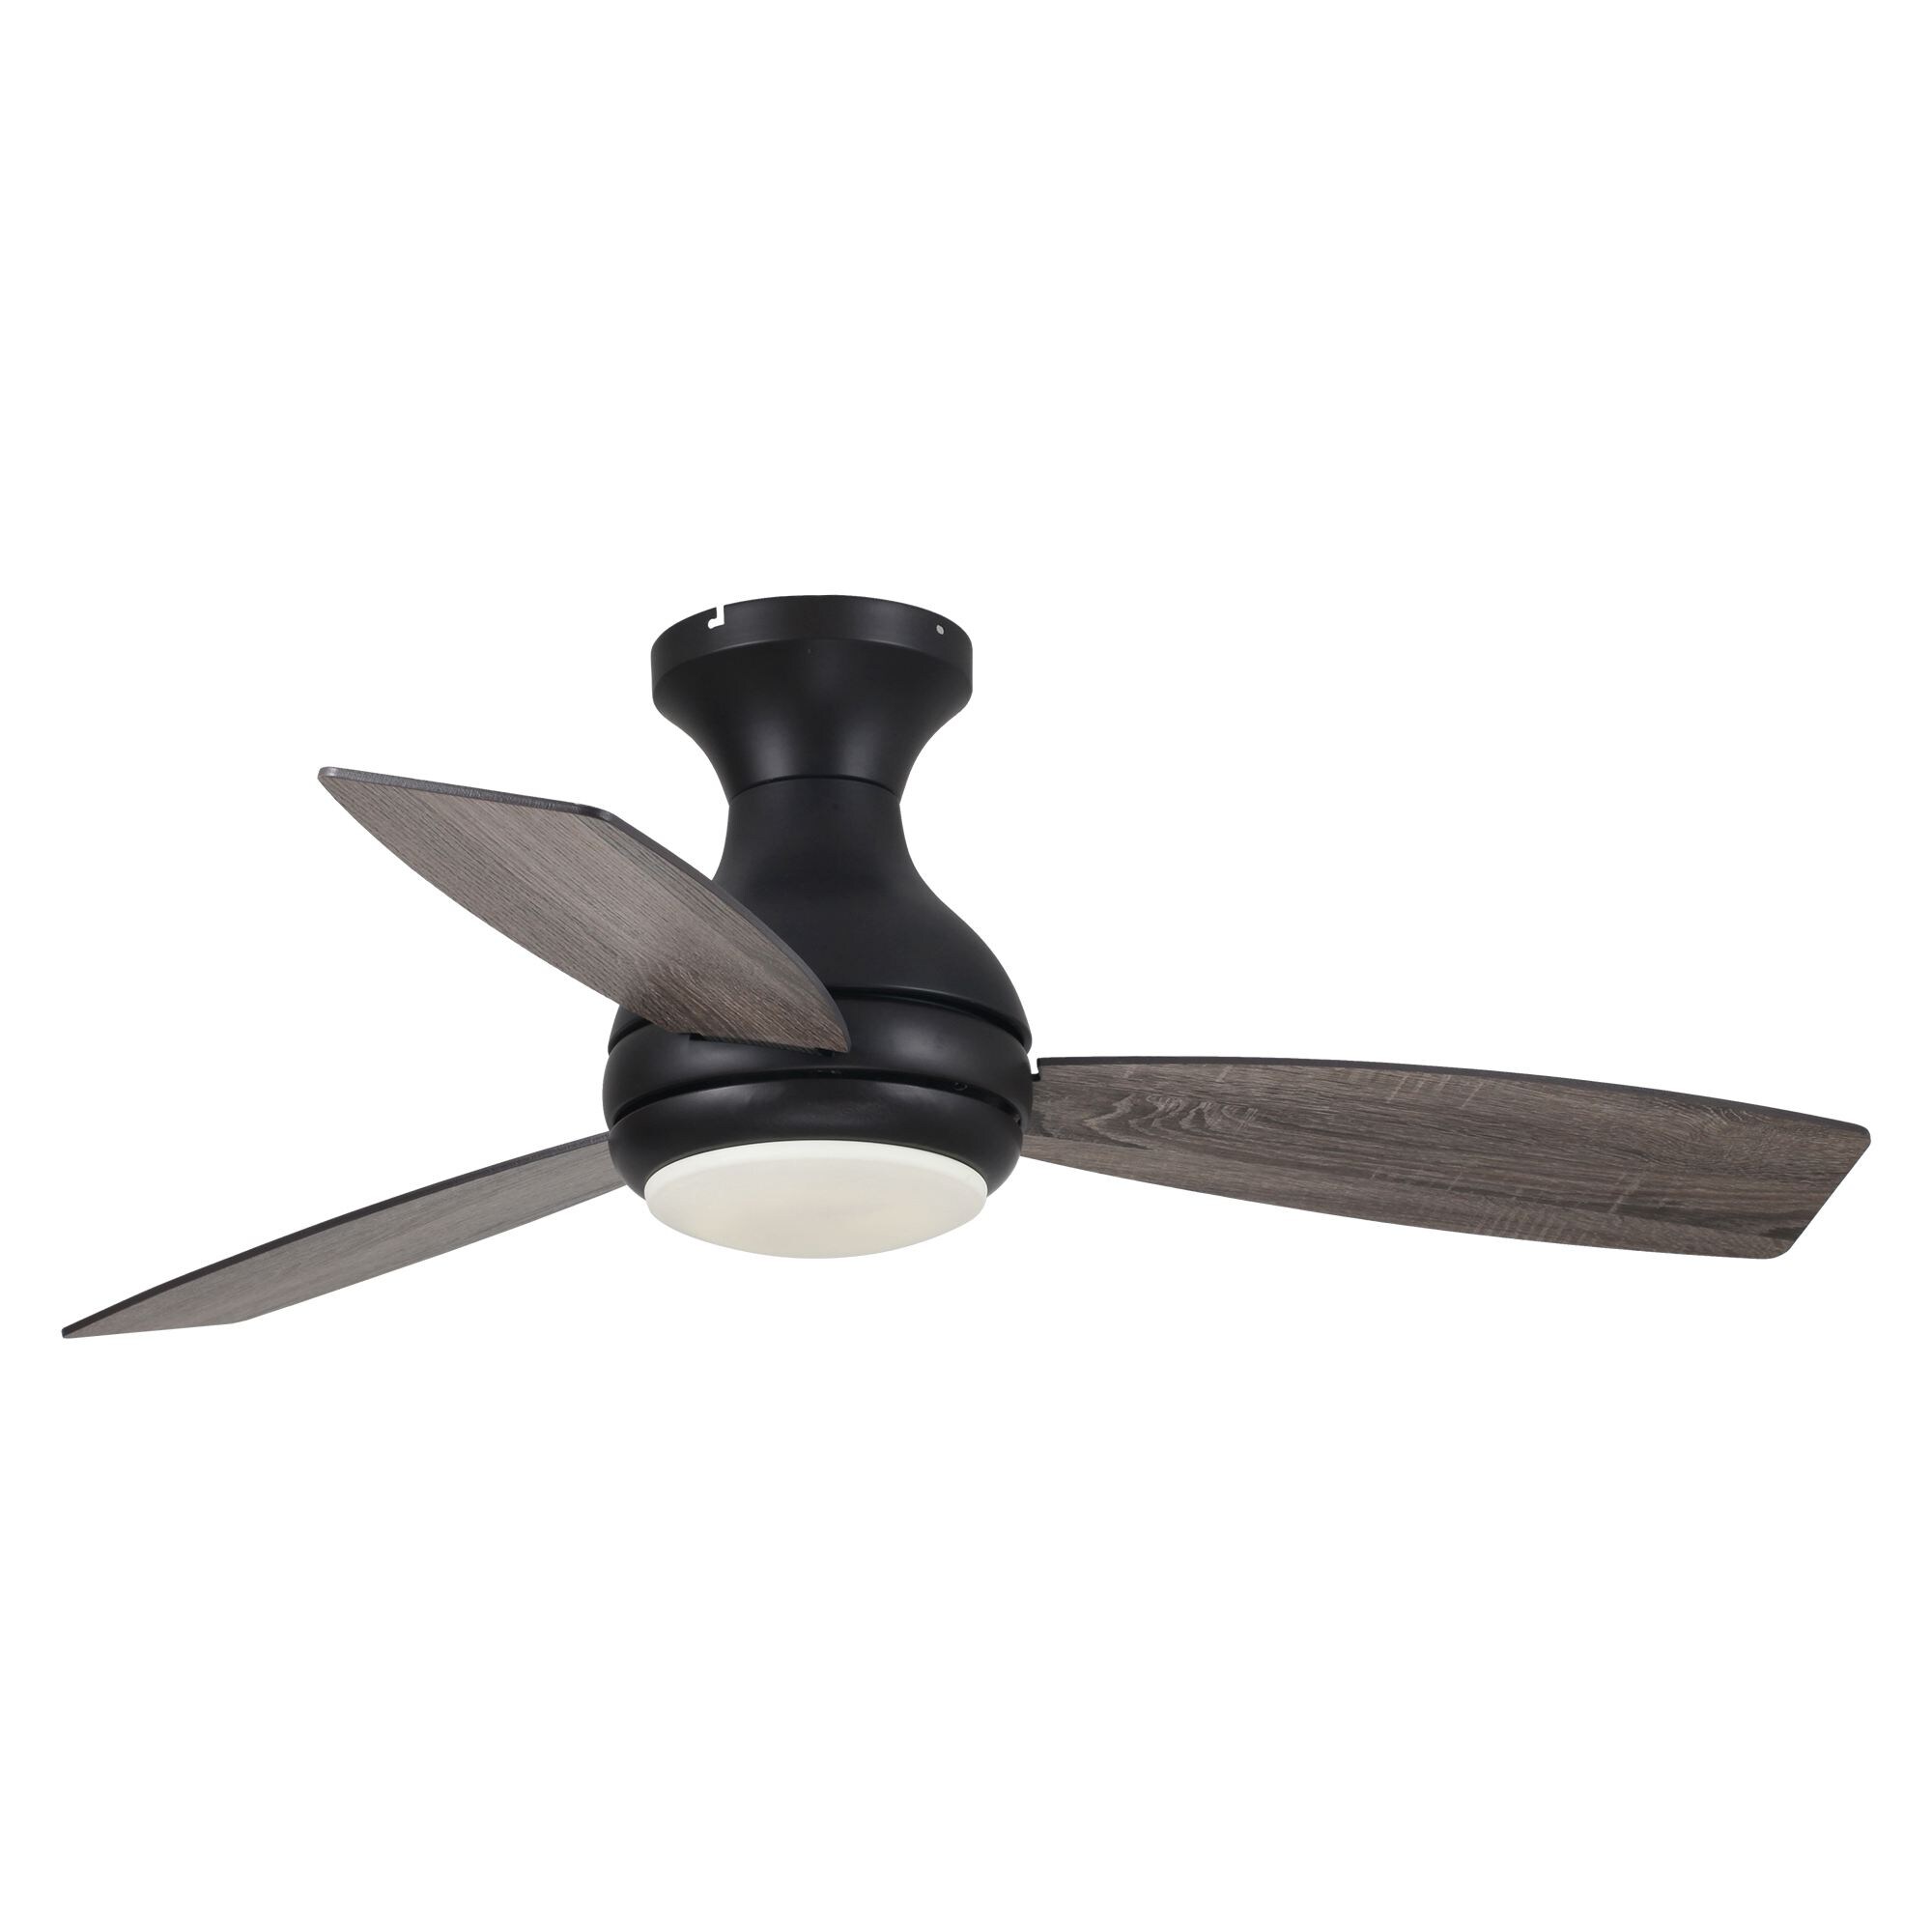 ELEGANT Ceiling Fans Black/White with LED Lights Kit Remote Control Noiseless Reversible DC Motor 3 Color Temperature Changeable,Modern Blade 48 Inch Fan Lighting 